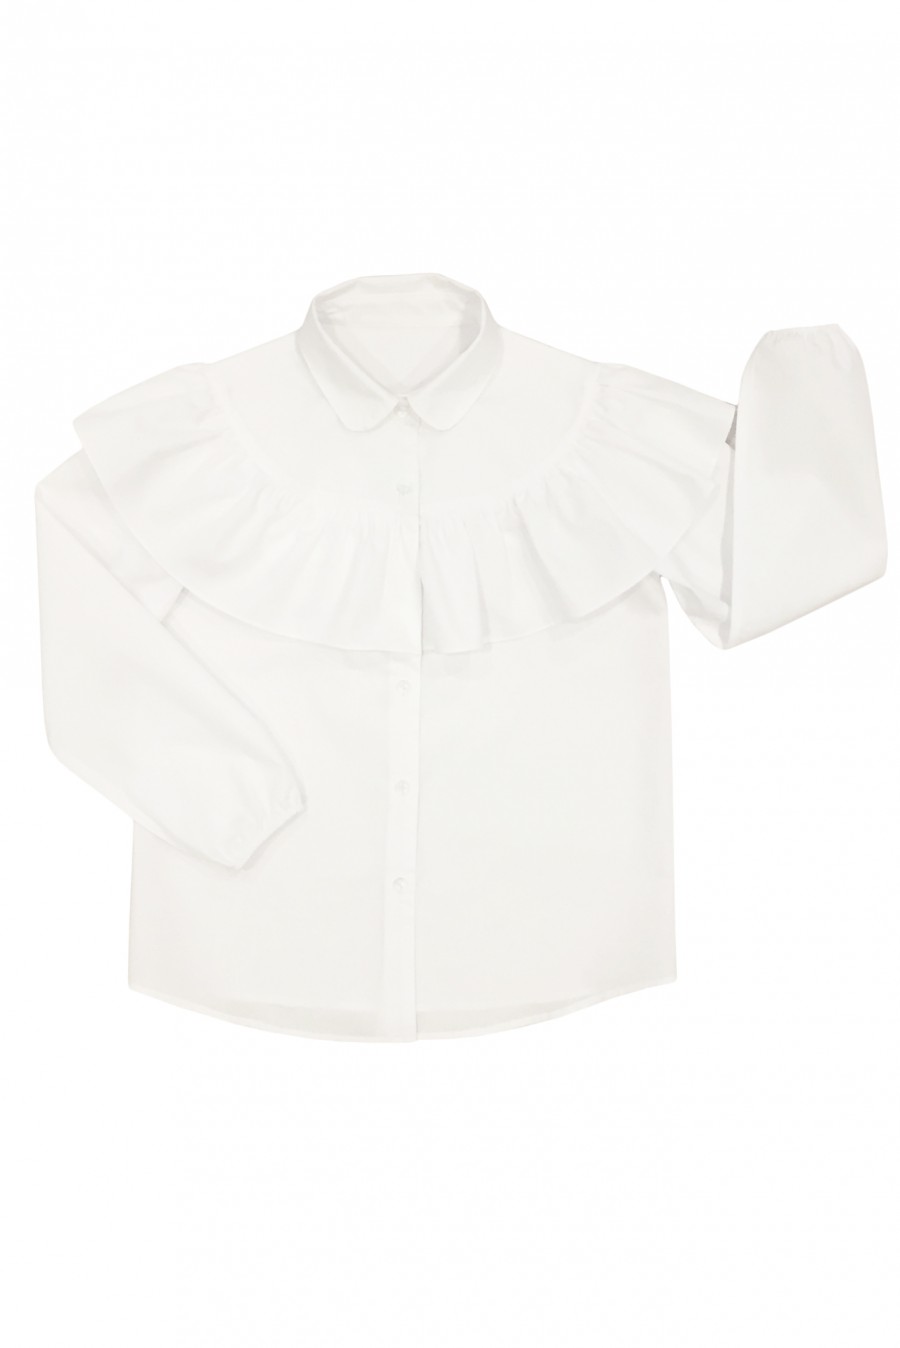 White blouse with ruffles MKR1012